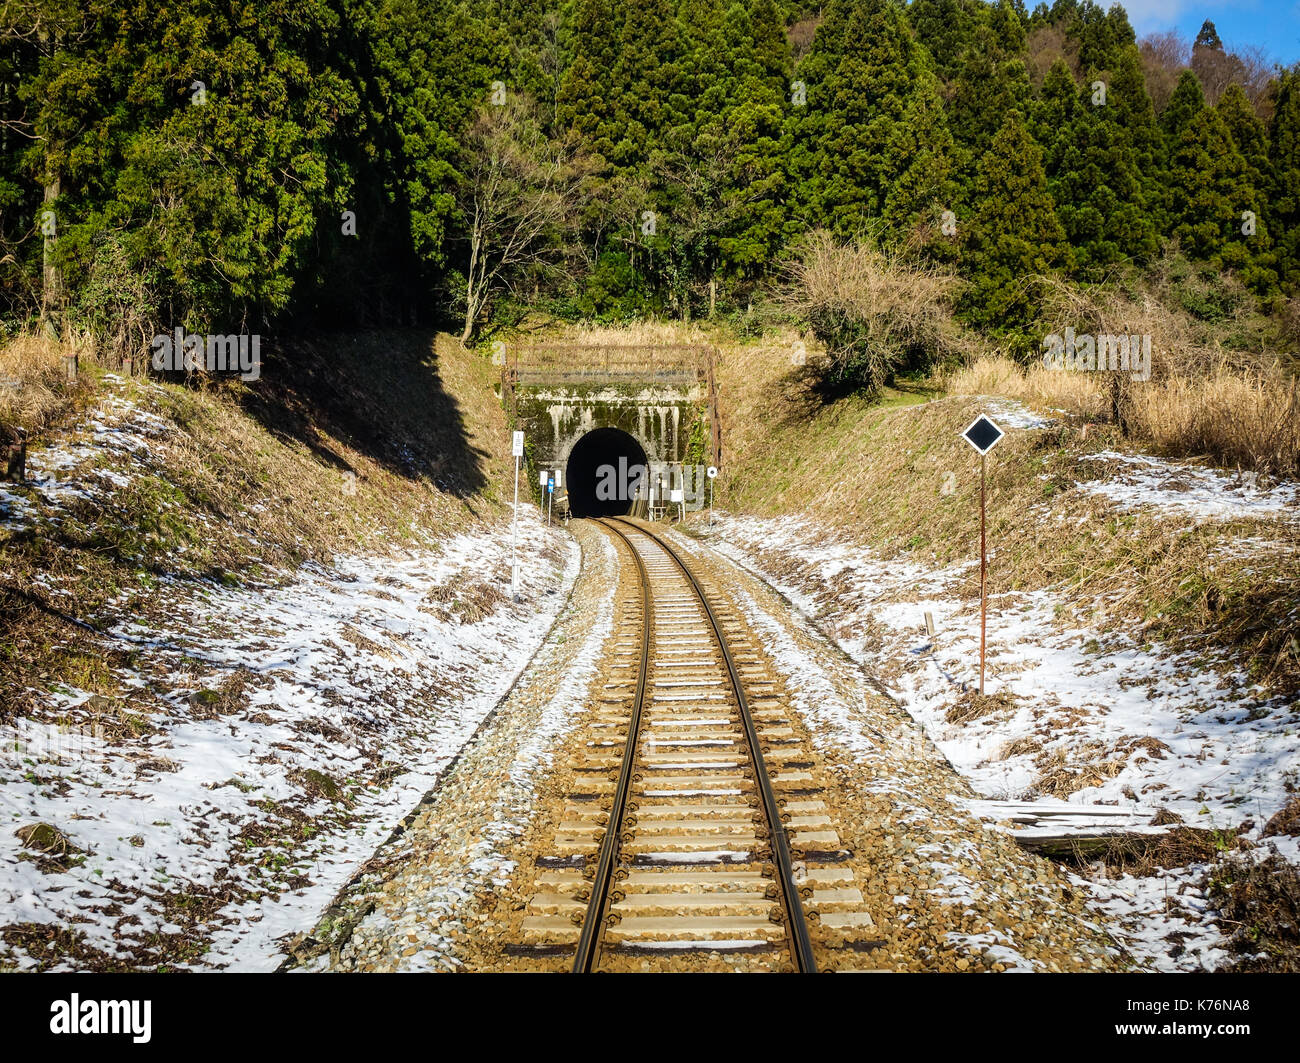 A railtrack with tunnel in Nagano, Japan. Nagano Prefecture (Nagano-ken) is a landlocked prefecture of Japan located in the Chubu region. Stock Photo